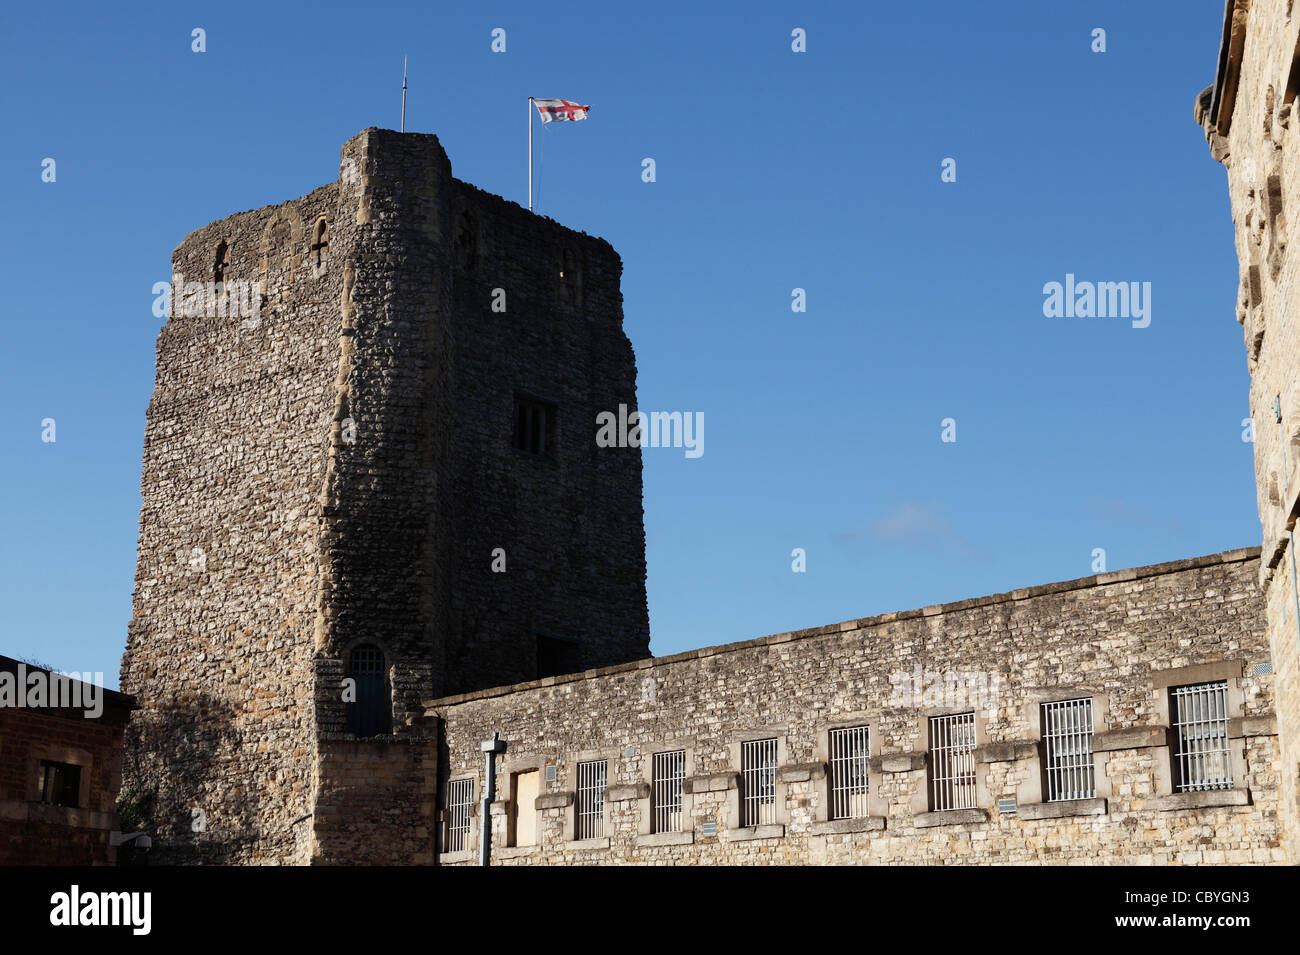 [Oxford Castle], 'St George's' Tower and old prison building, Oxford, Oxfordshire, England, UK Stock Photo